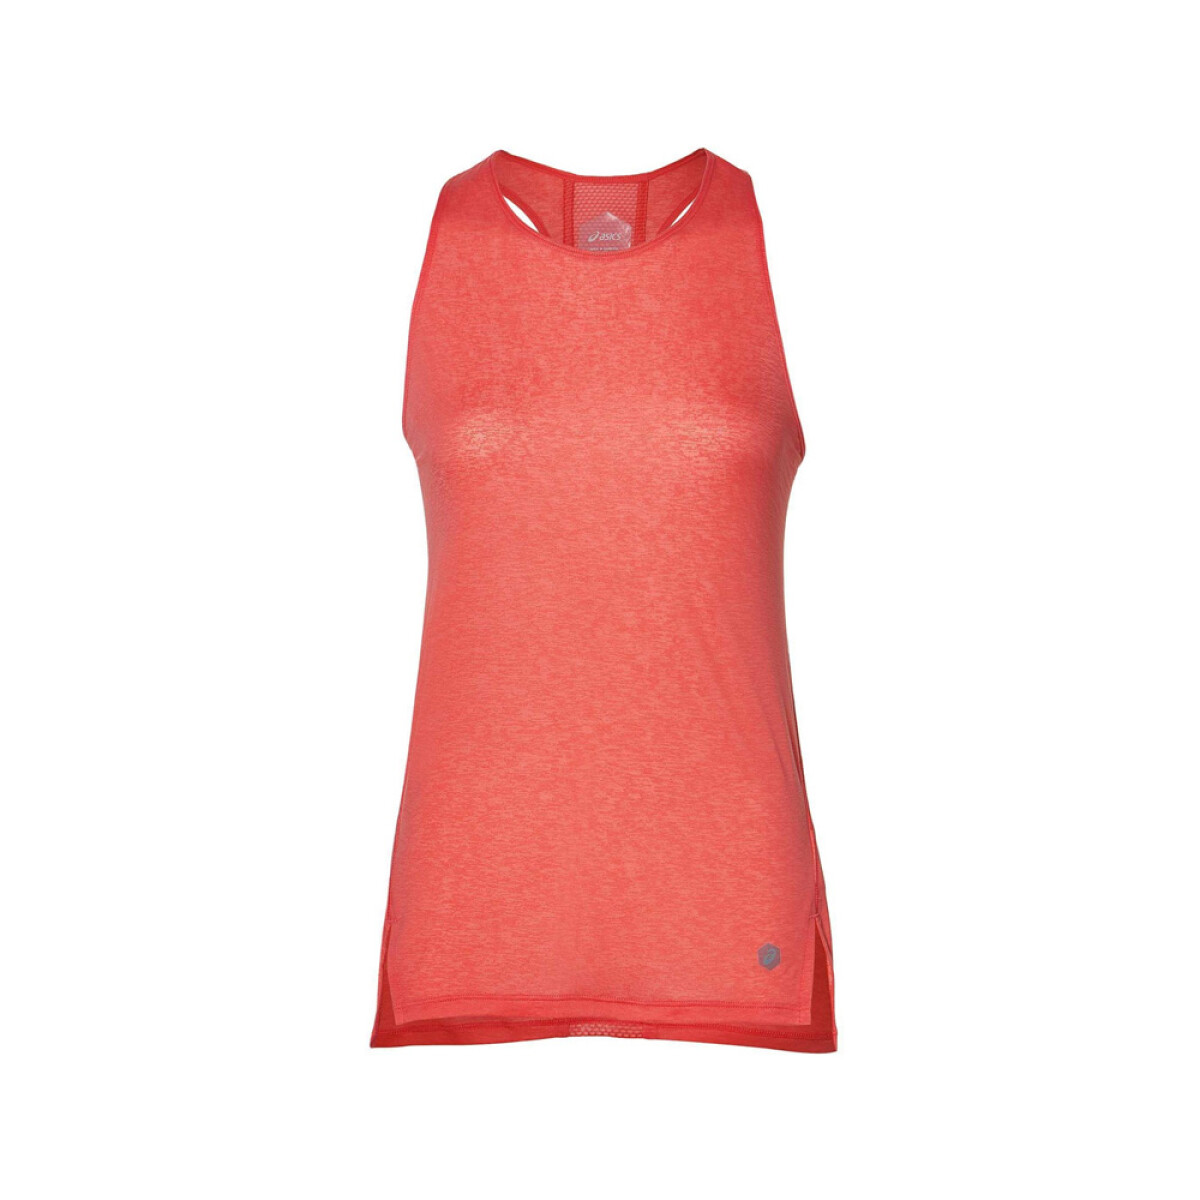 MUSCULOSA ASICS COOL TANK - Coral 